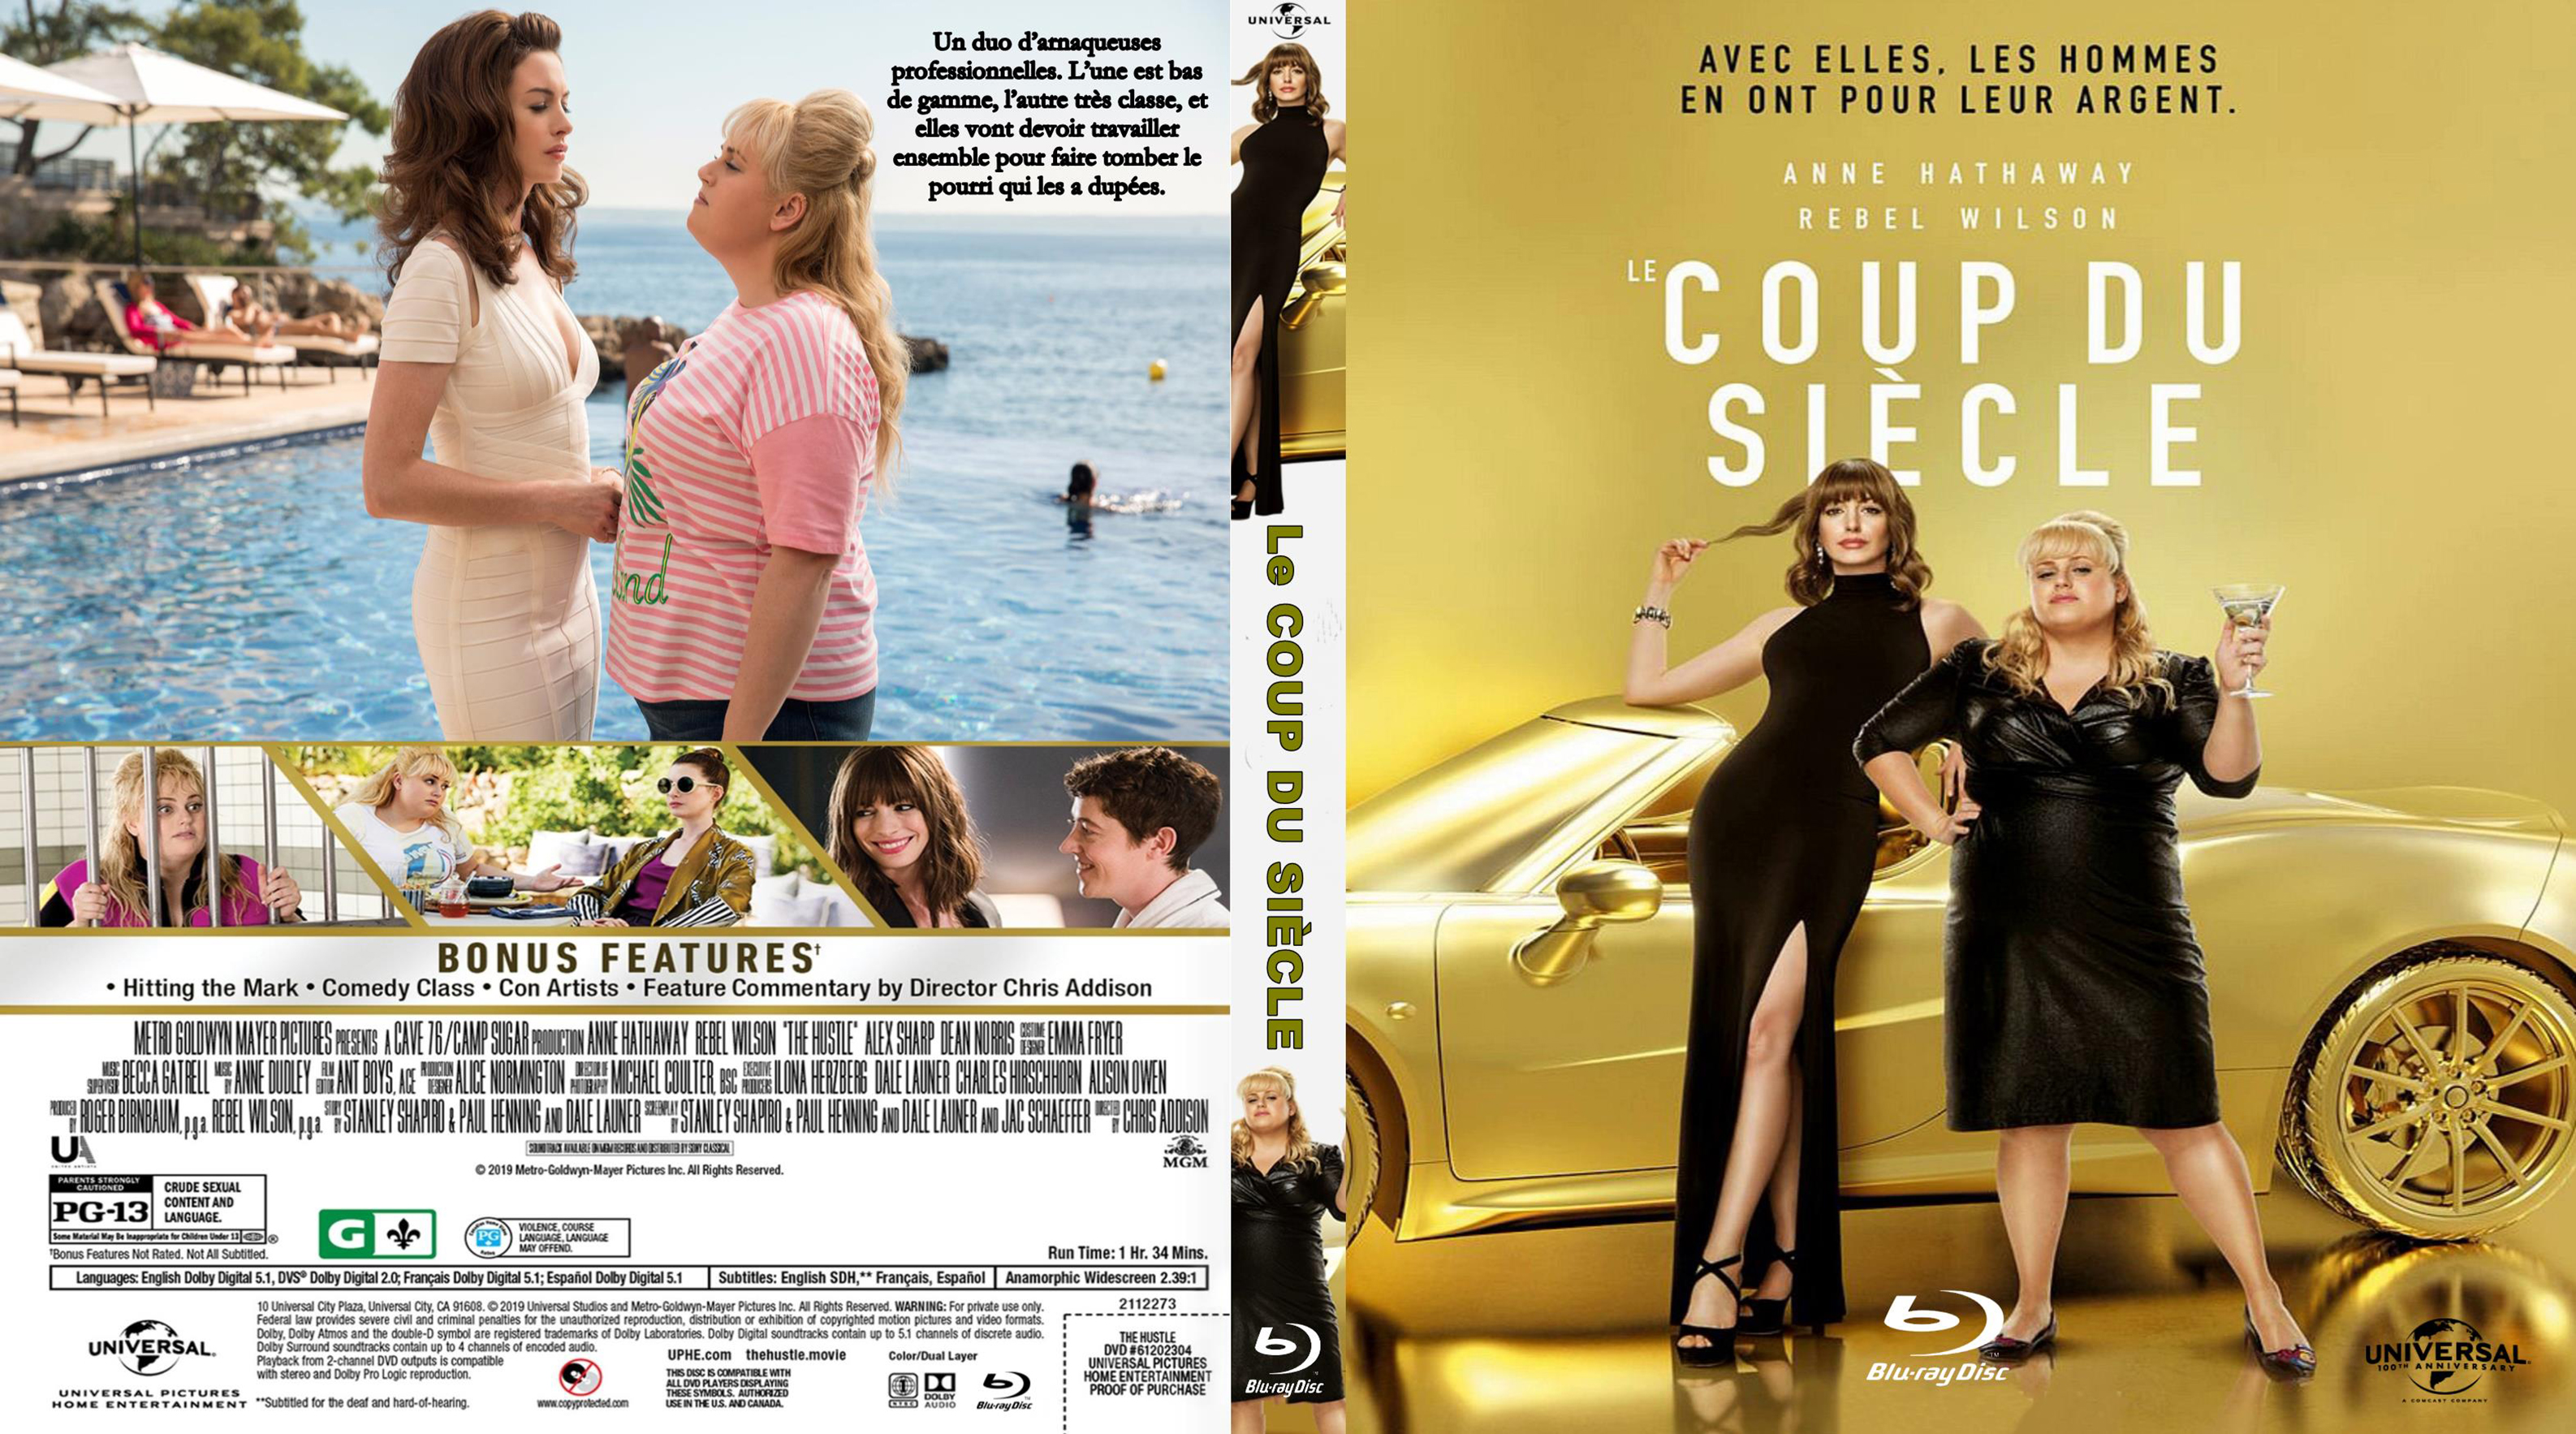 Jaquette DVD Le Coup du sicle custom (BLU-RAY)